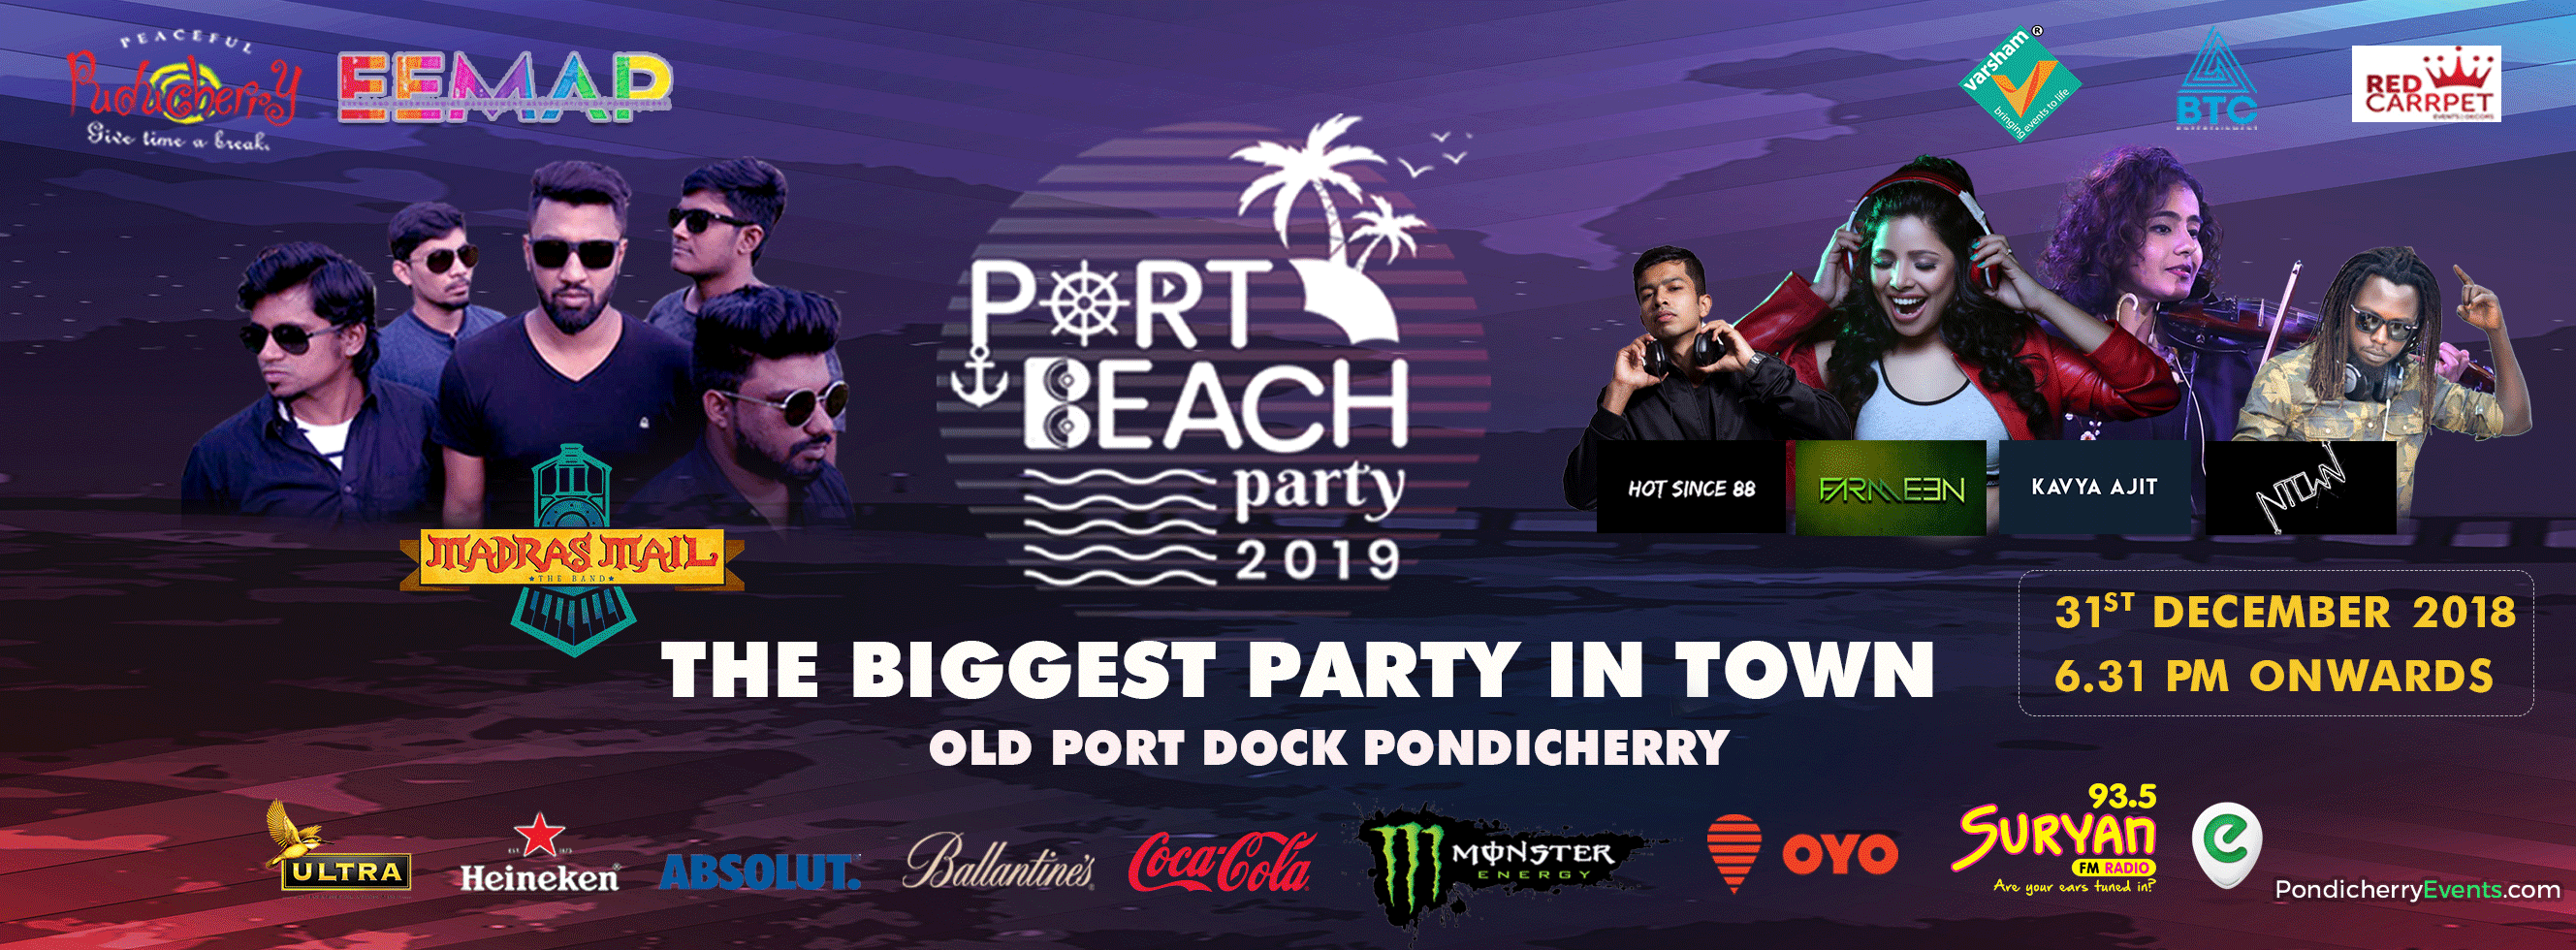 Beach Party, Mottoparty